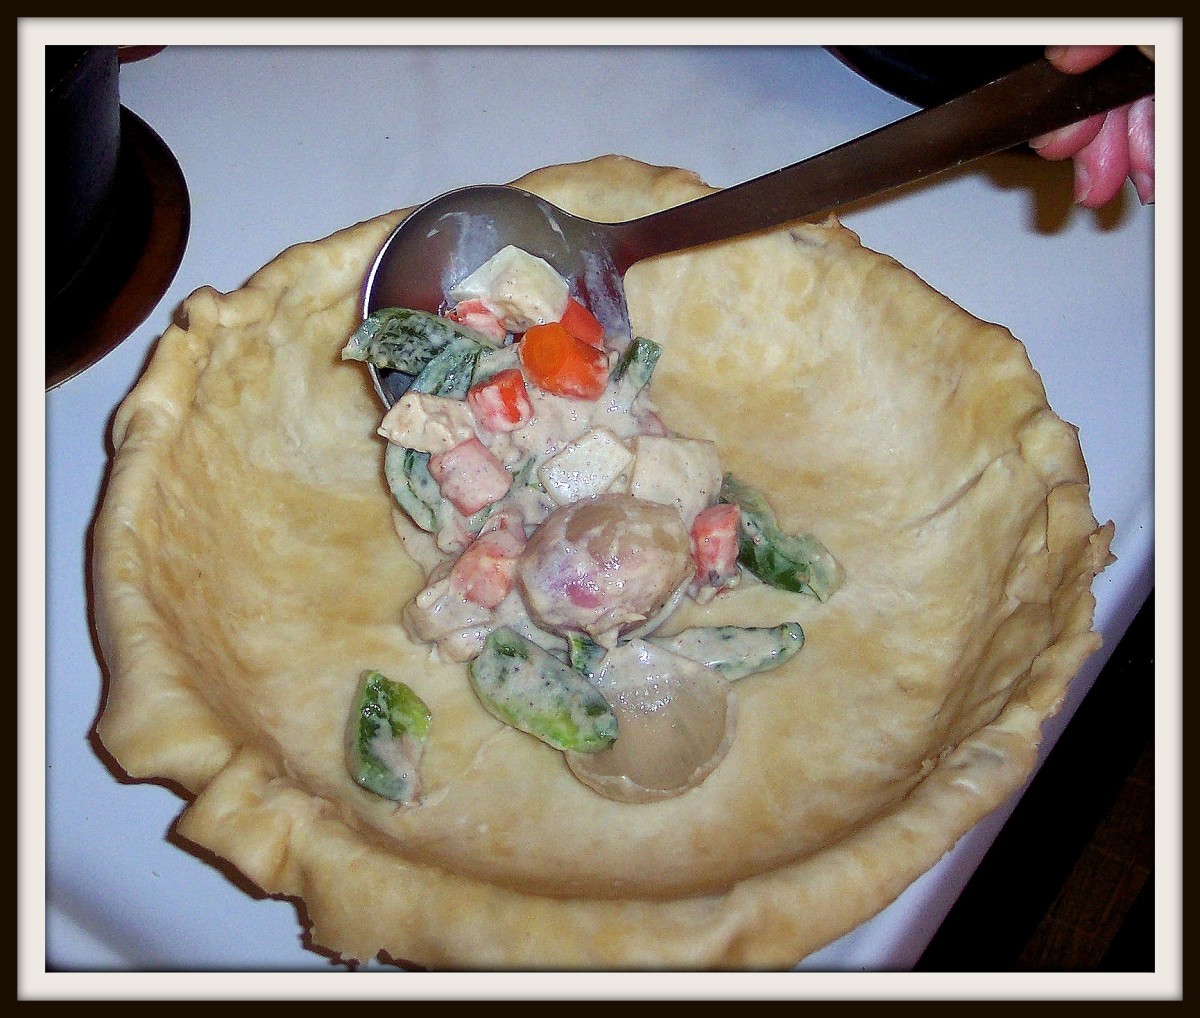 chicken-potpie-with-veggies-in-a-white-sauce-the-ultimate-comfort-food